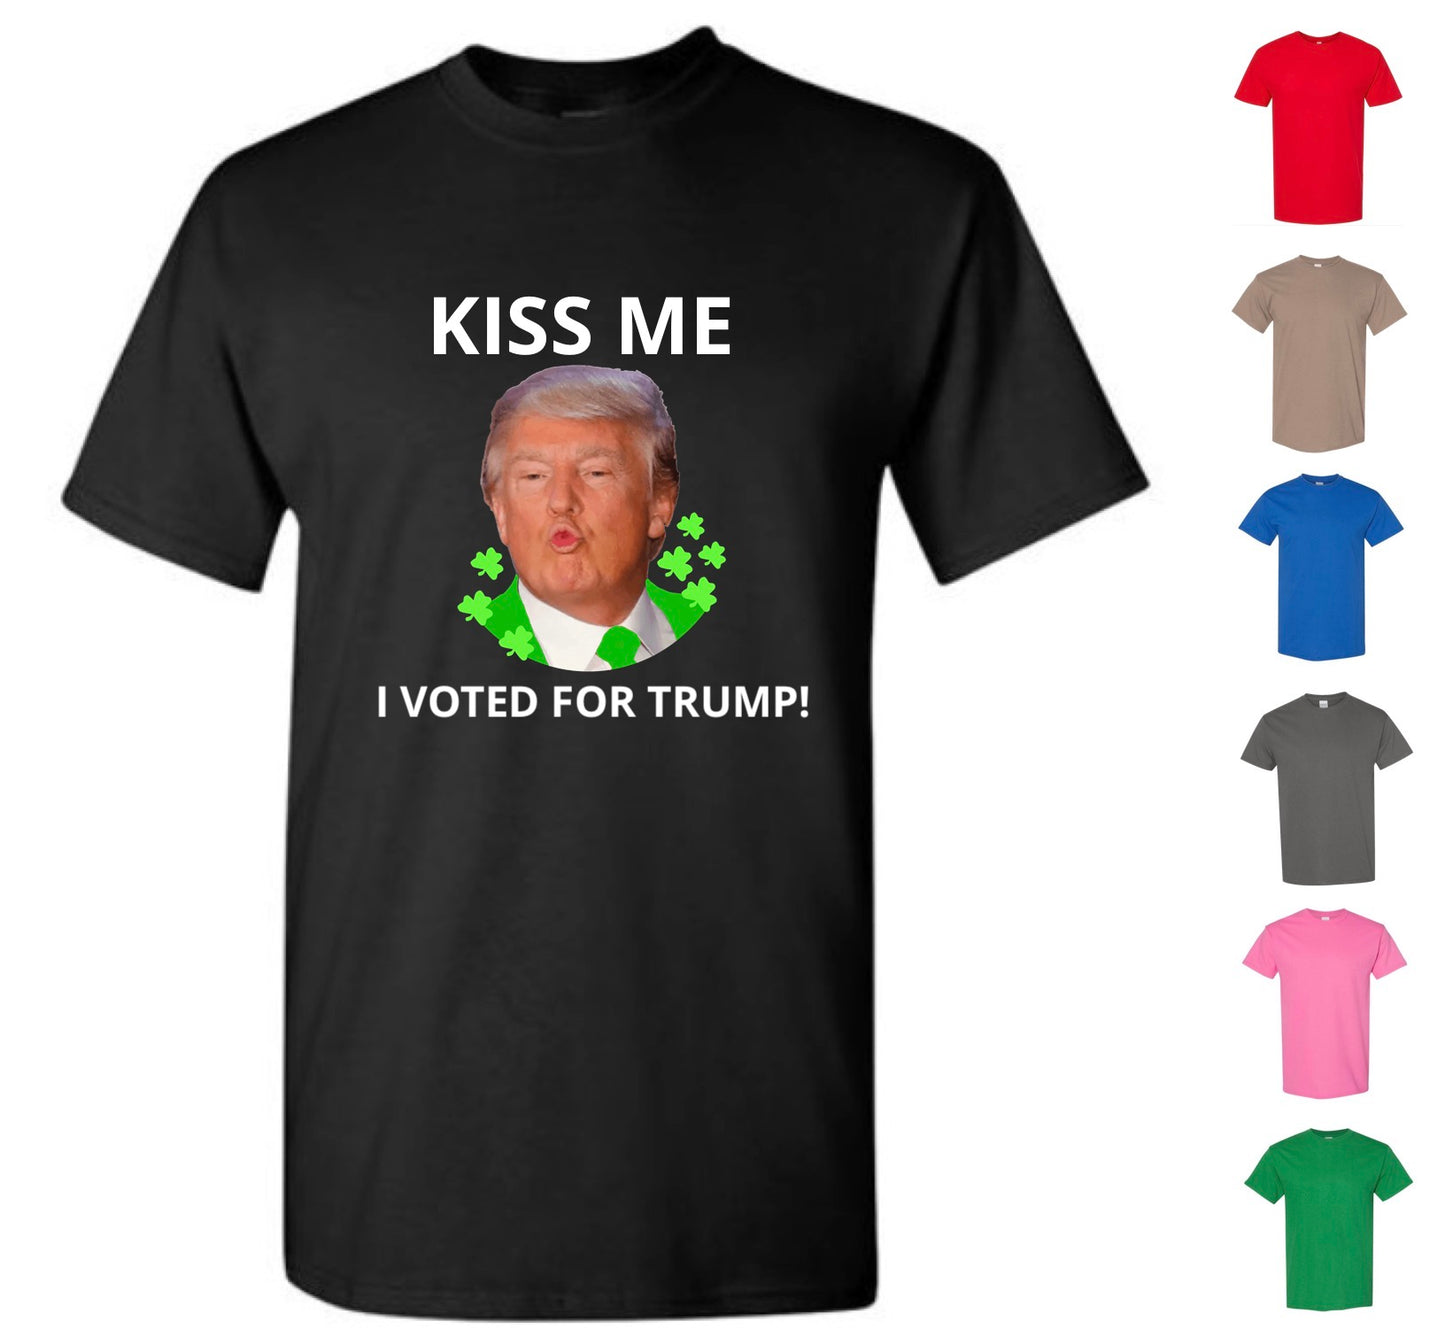 Kiss Me, I Voted For Trump T-Shirt (FREE Shipping)